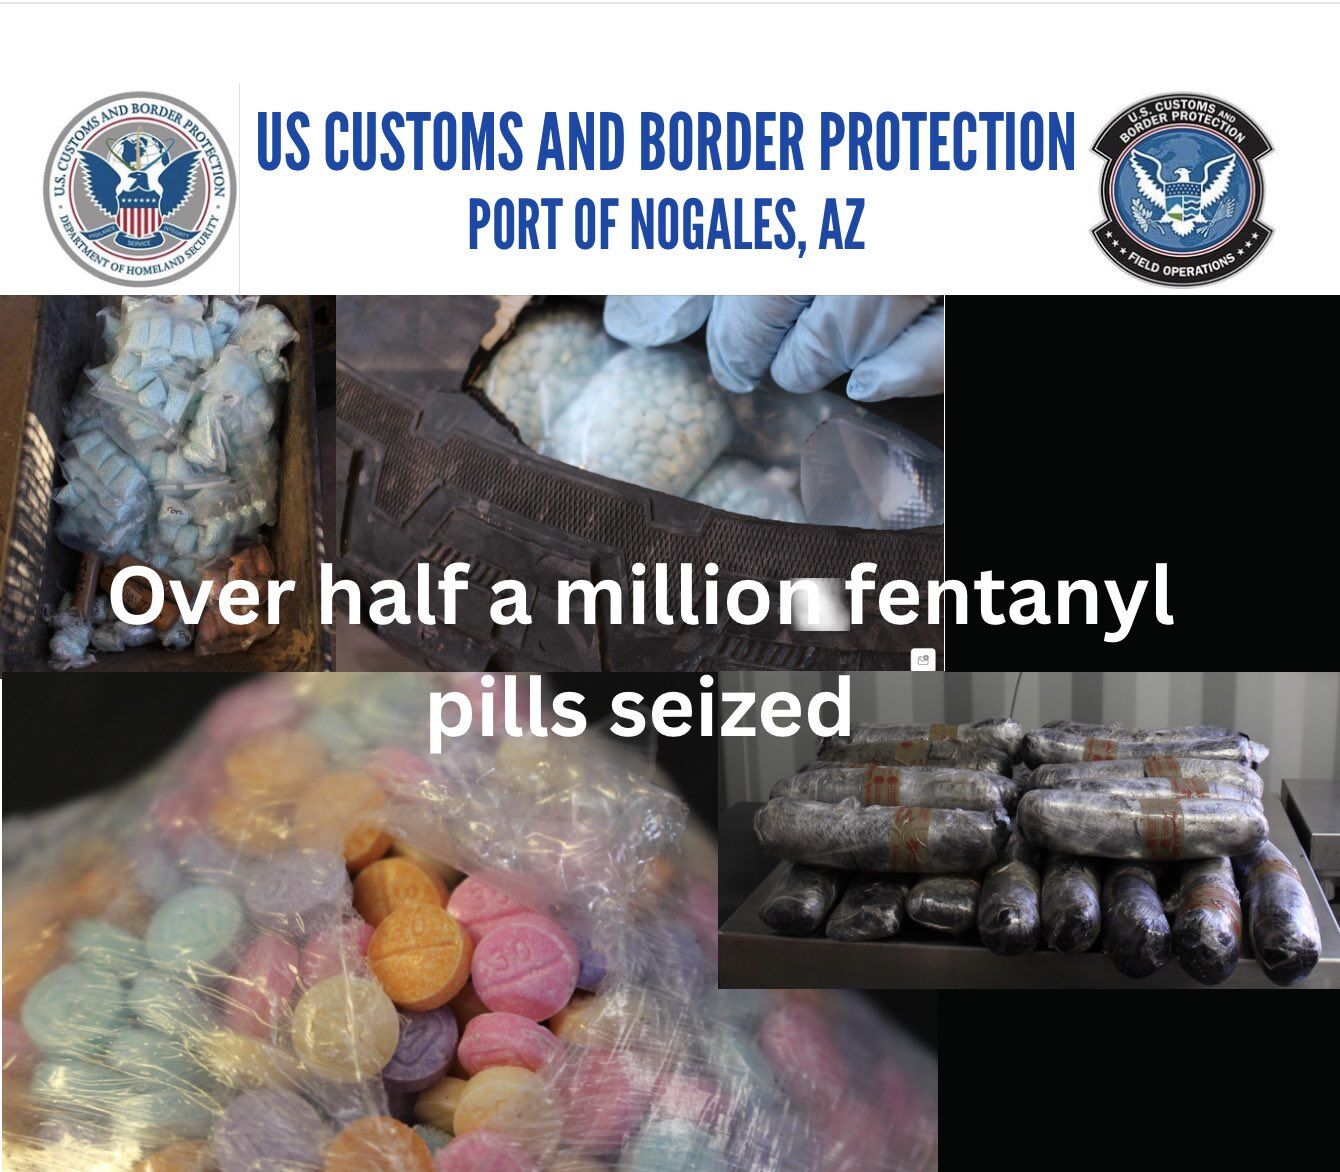 More than 3 million fentanyl pills confiscated at Port of Nogales over  weekend